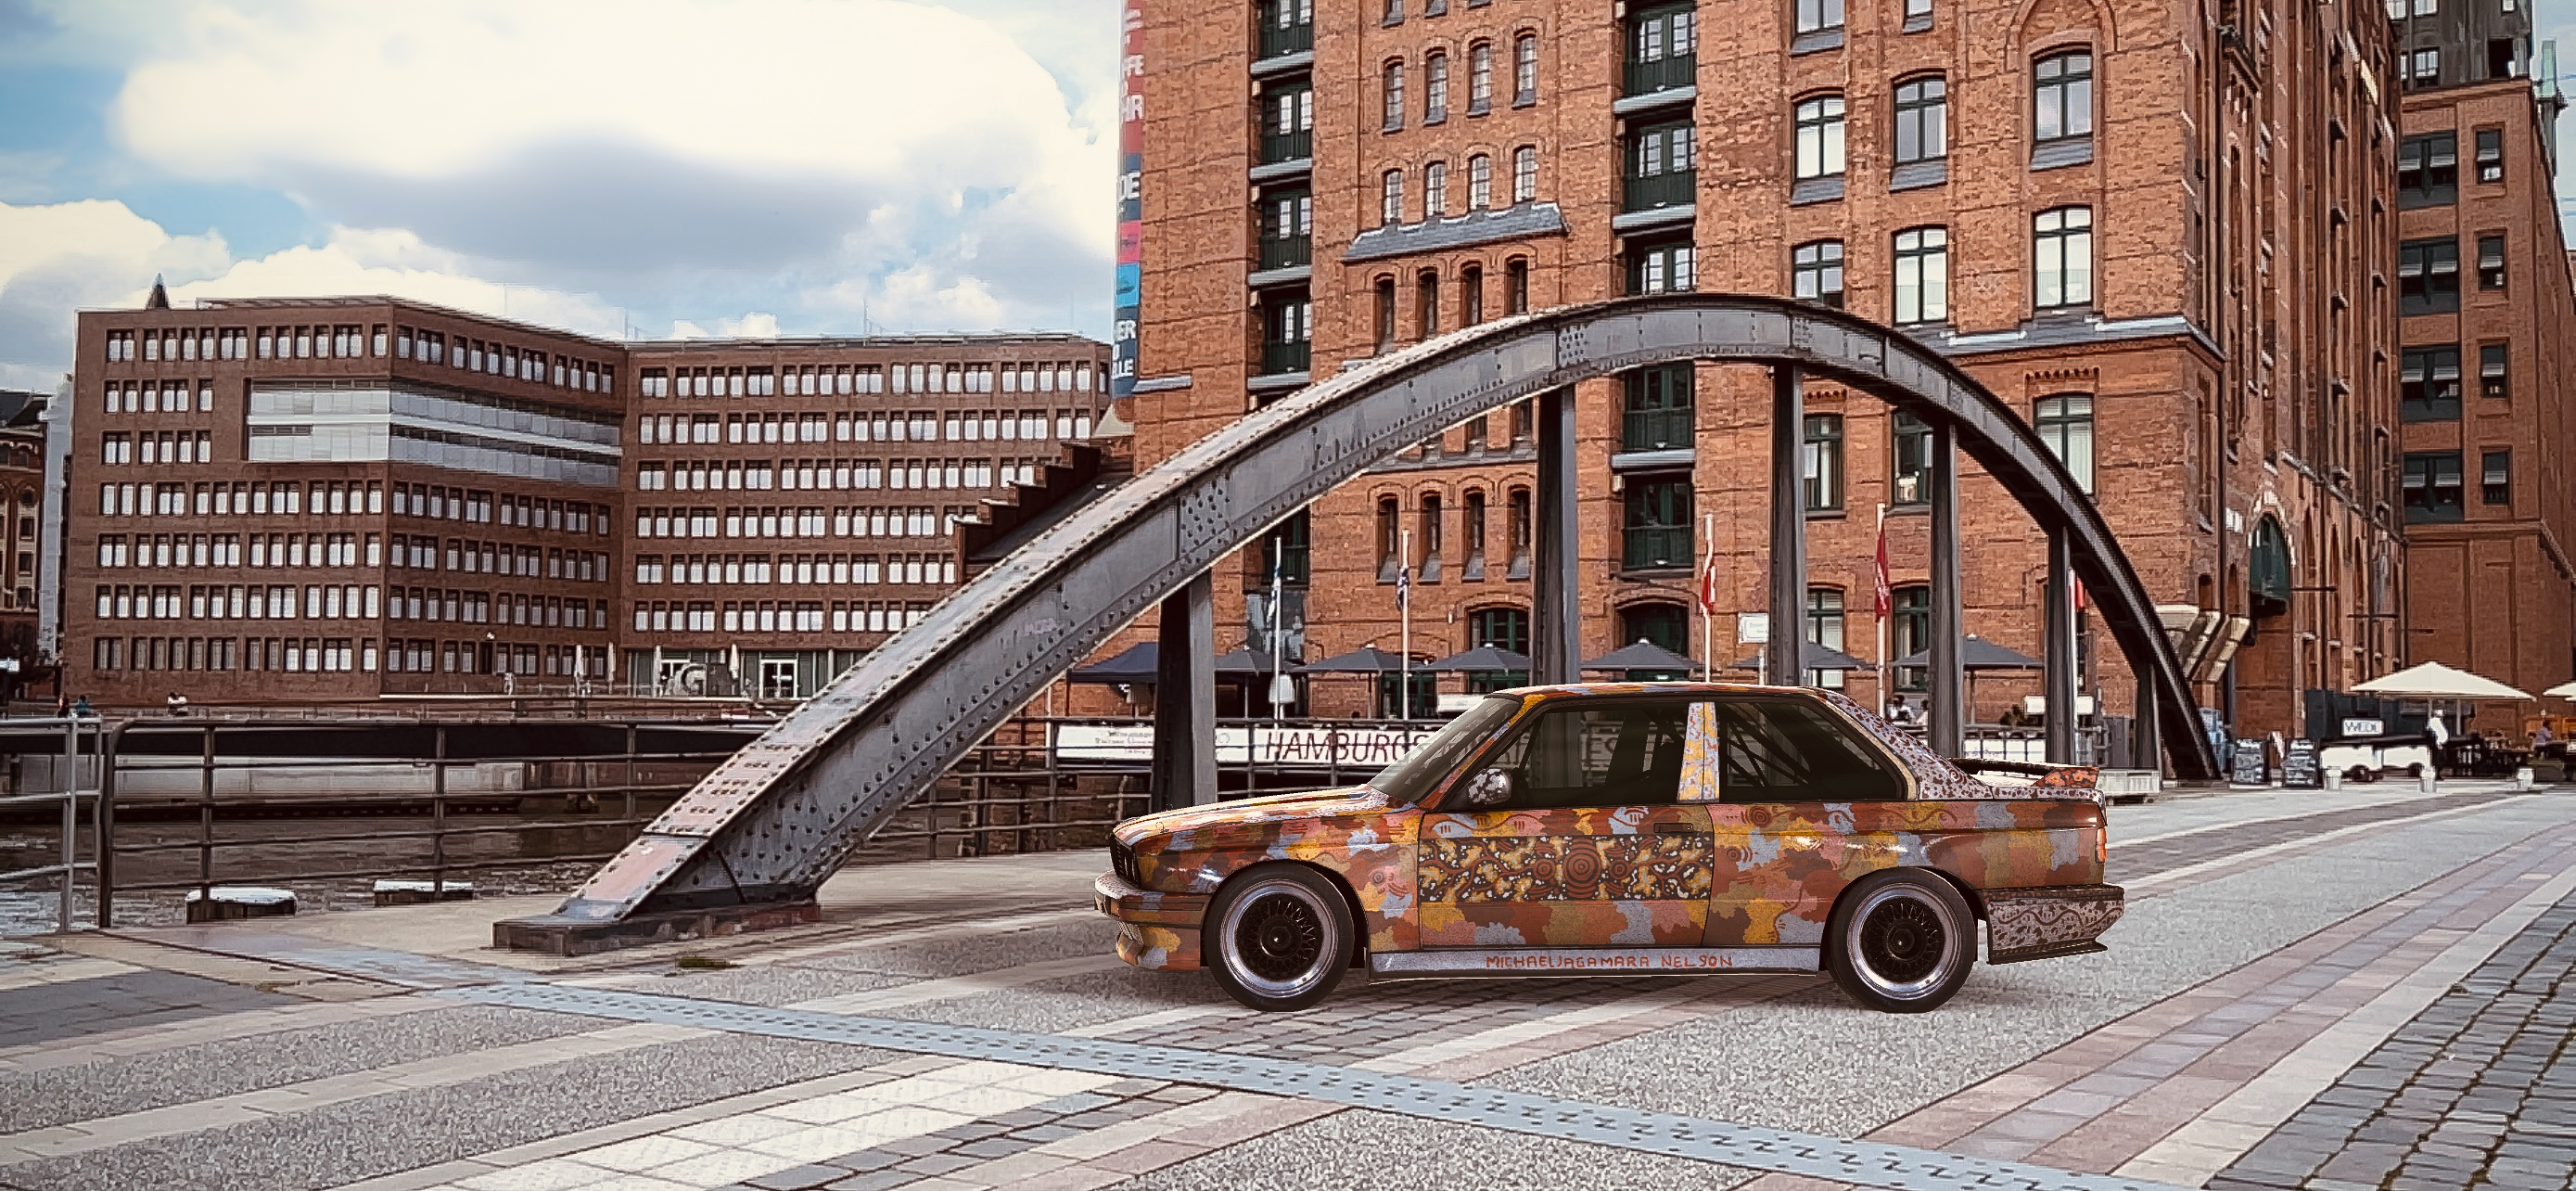 A BMW sedan covered in patterns of ochre, yellow, brown and blue parked on the pavement in front of high-rise buildings.